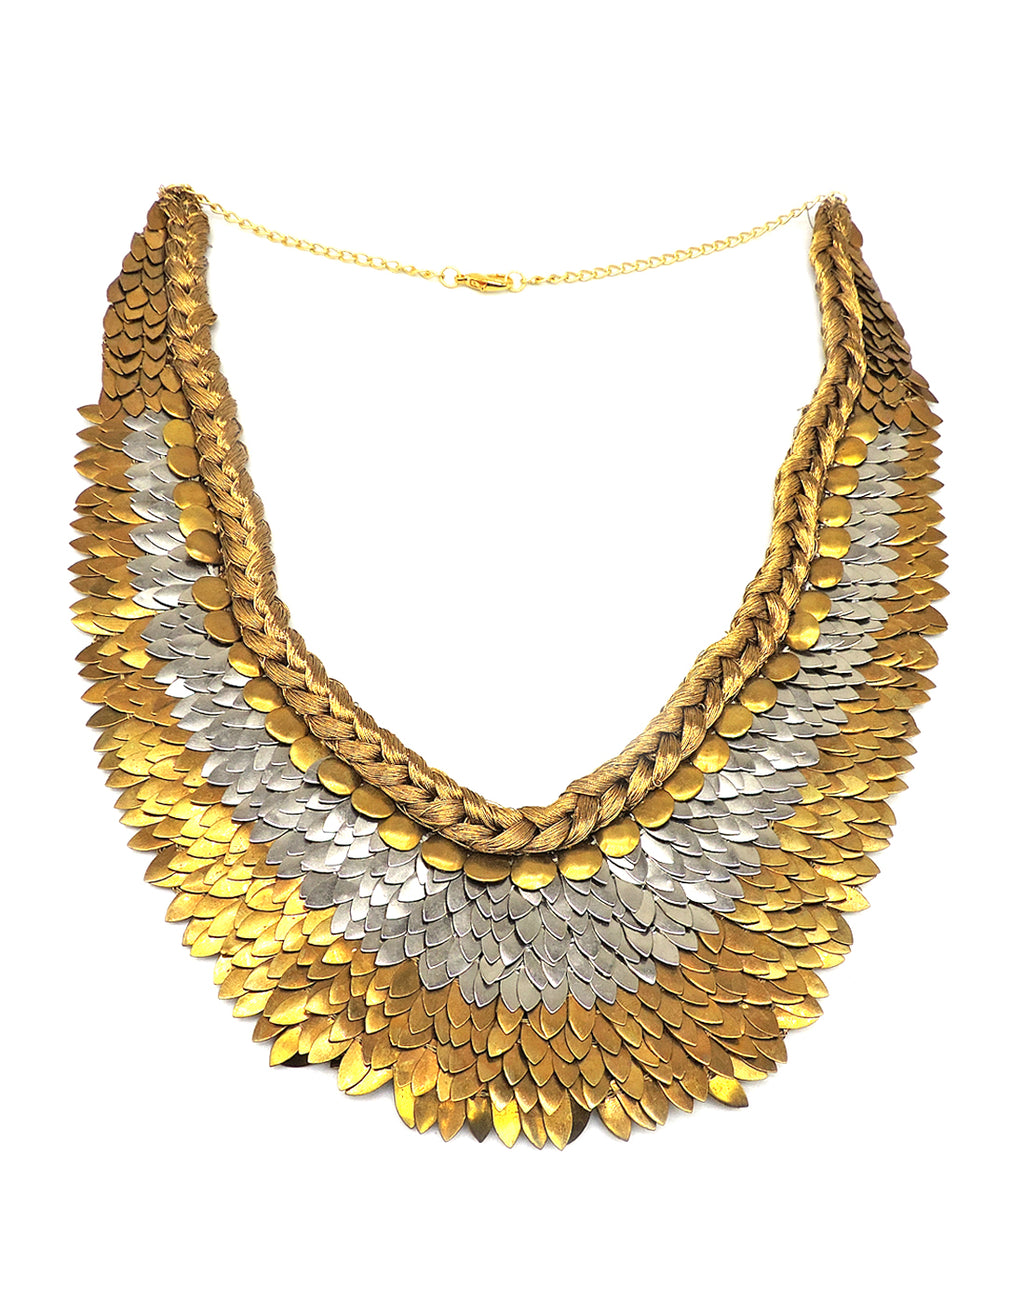 Gold & Silver Bib Necklace - Statement Necklaces - Gold-Plated & Hypoallergenic Jewellery - Made in India - Dubai Jewellery - Dori